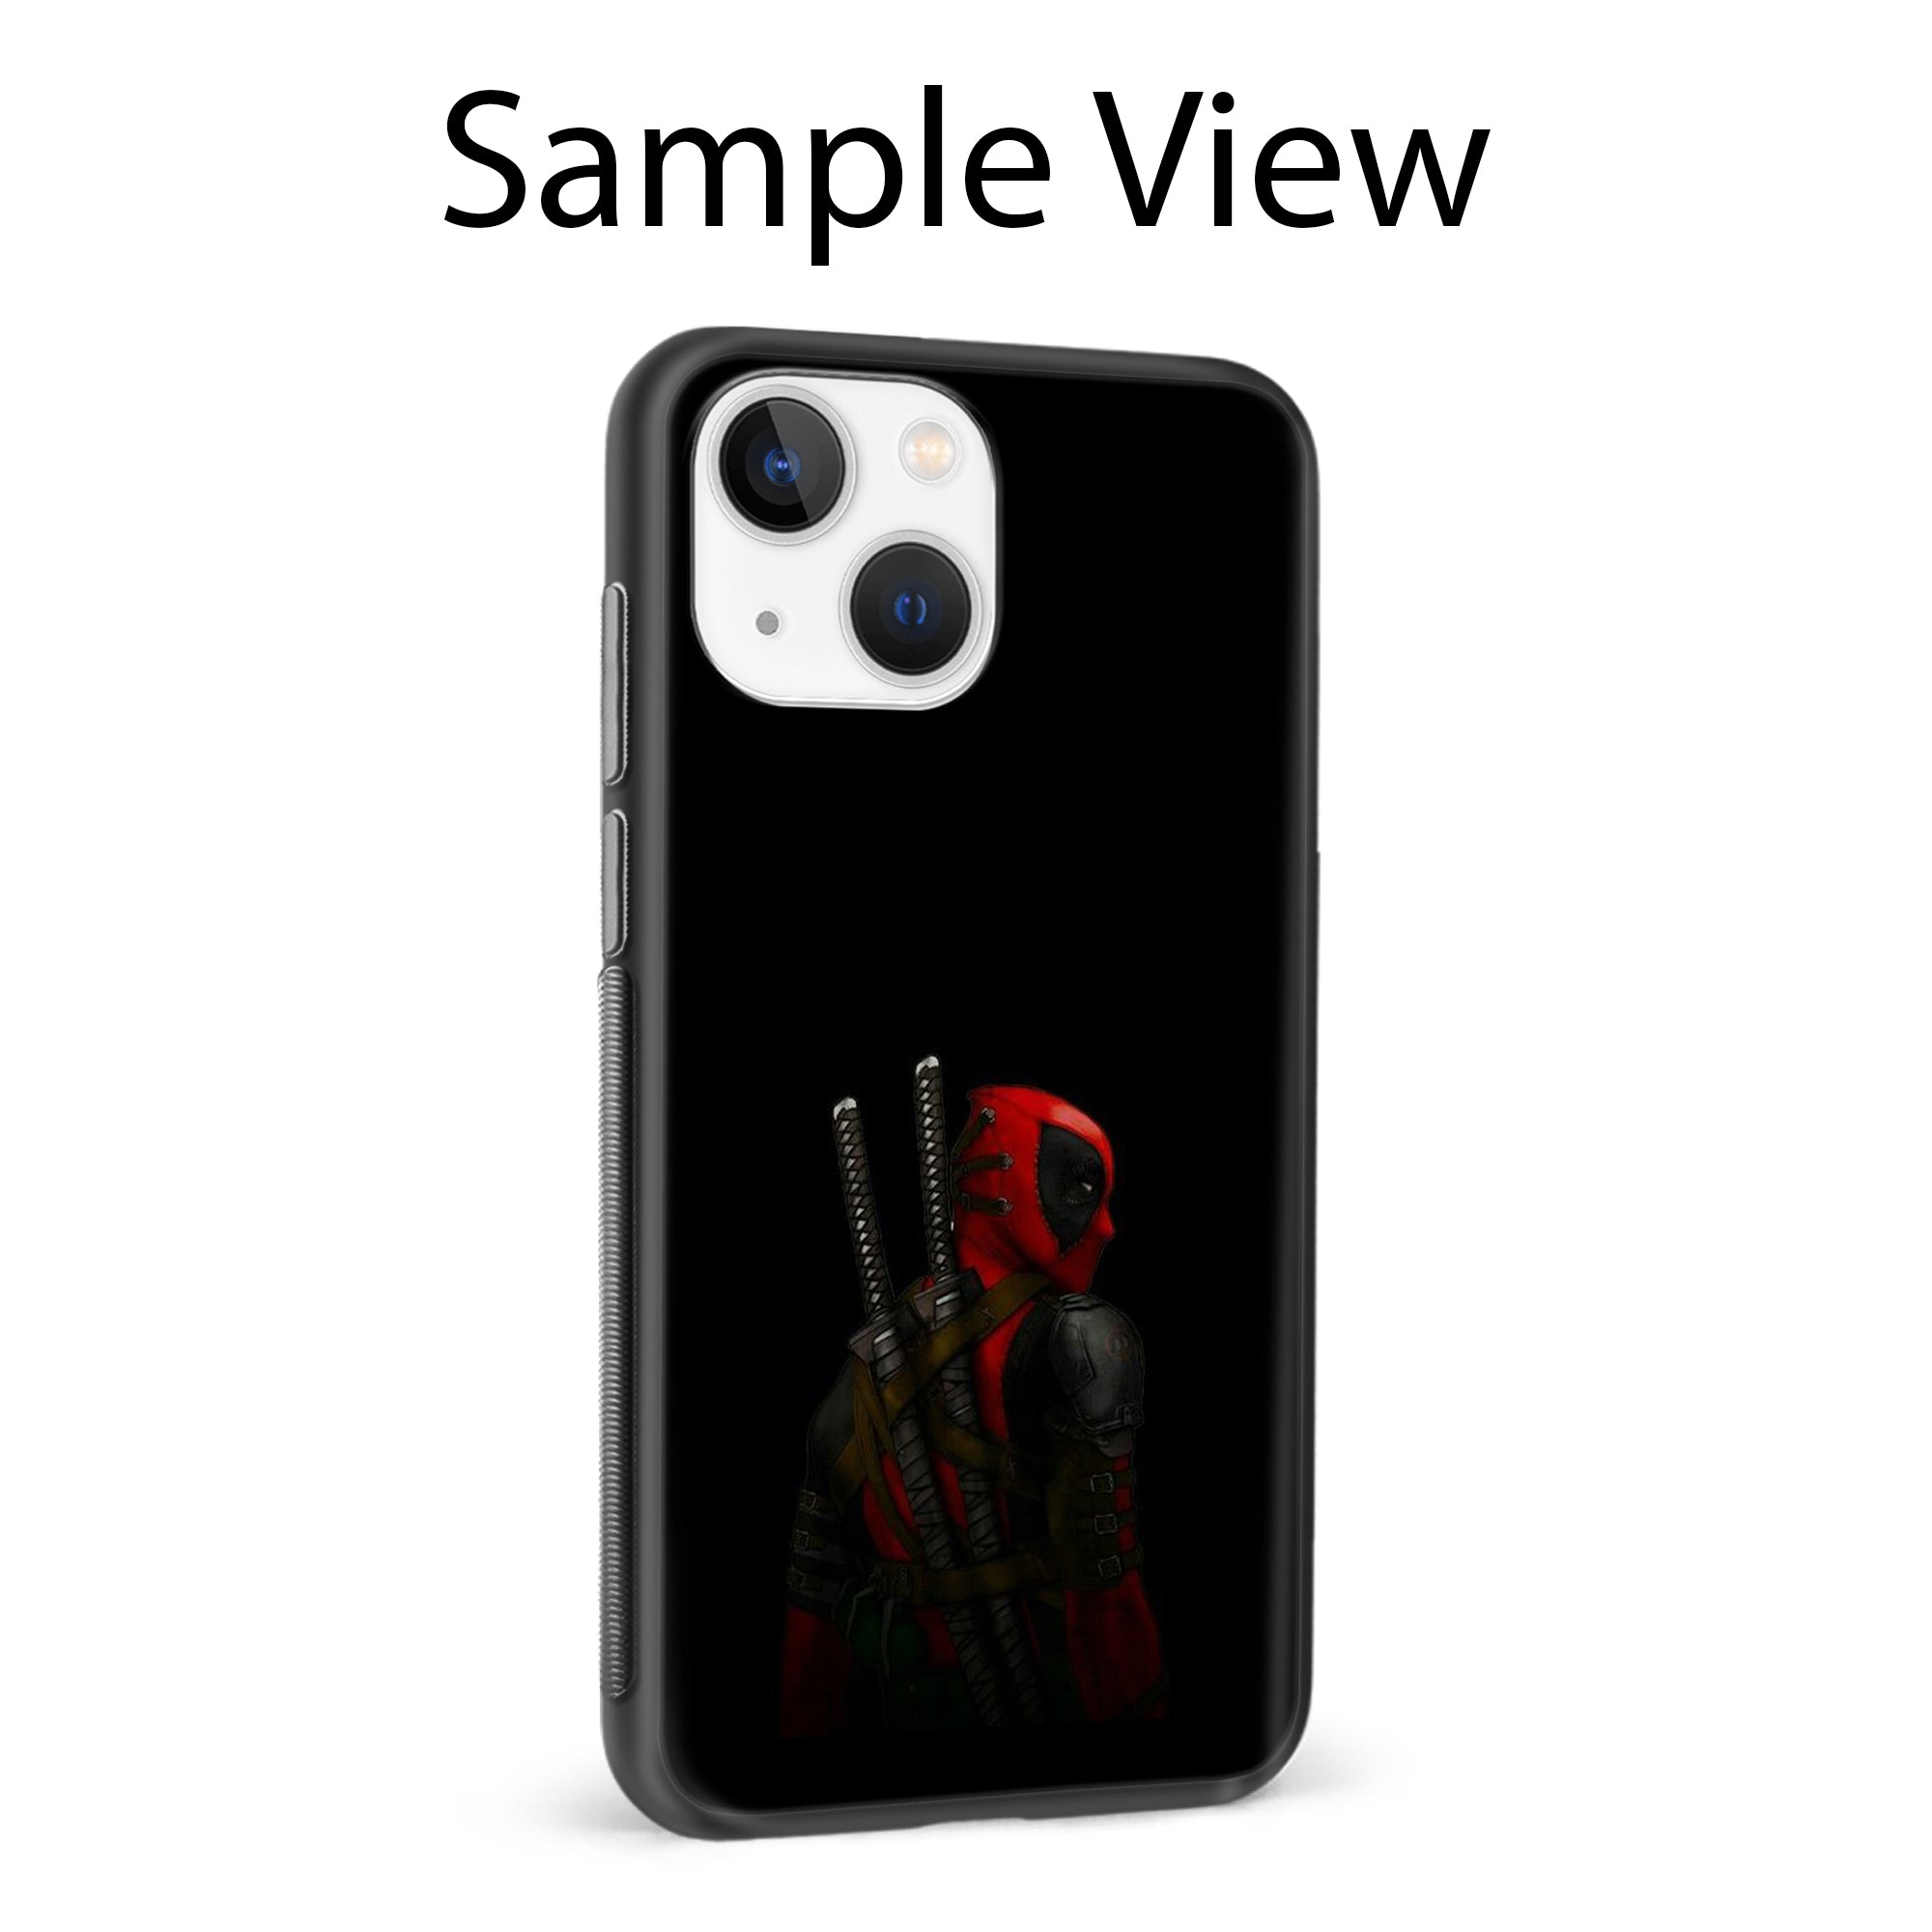 Buy Deadpool Metal-Silicon Back Mobile Phone Case/Cover For Samsung Galaxy F41 Online